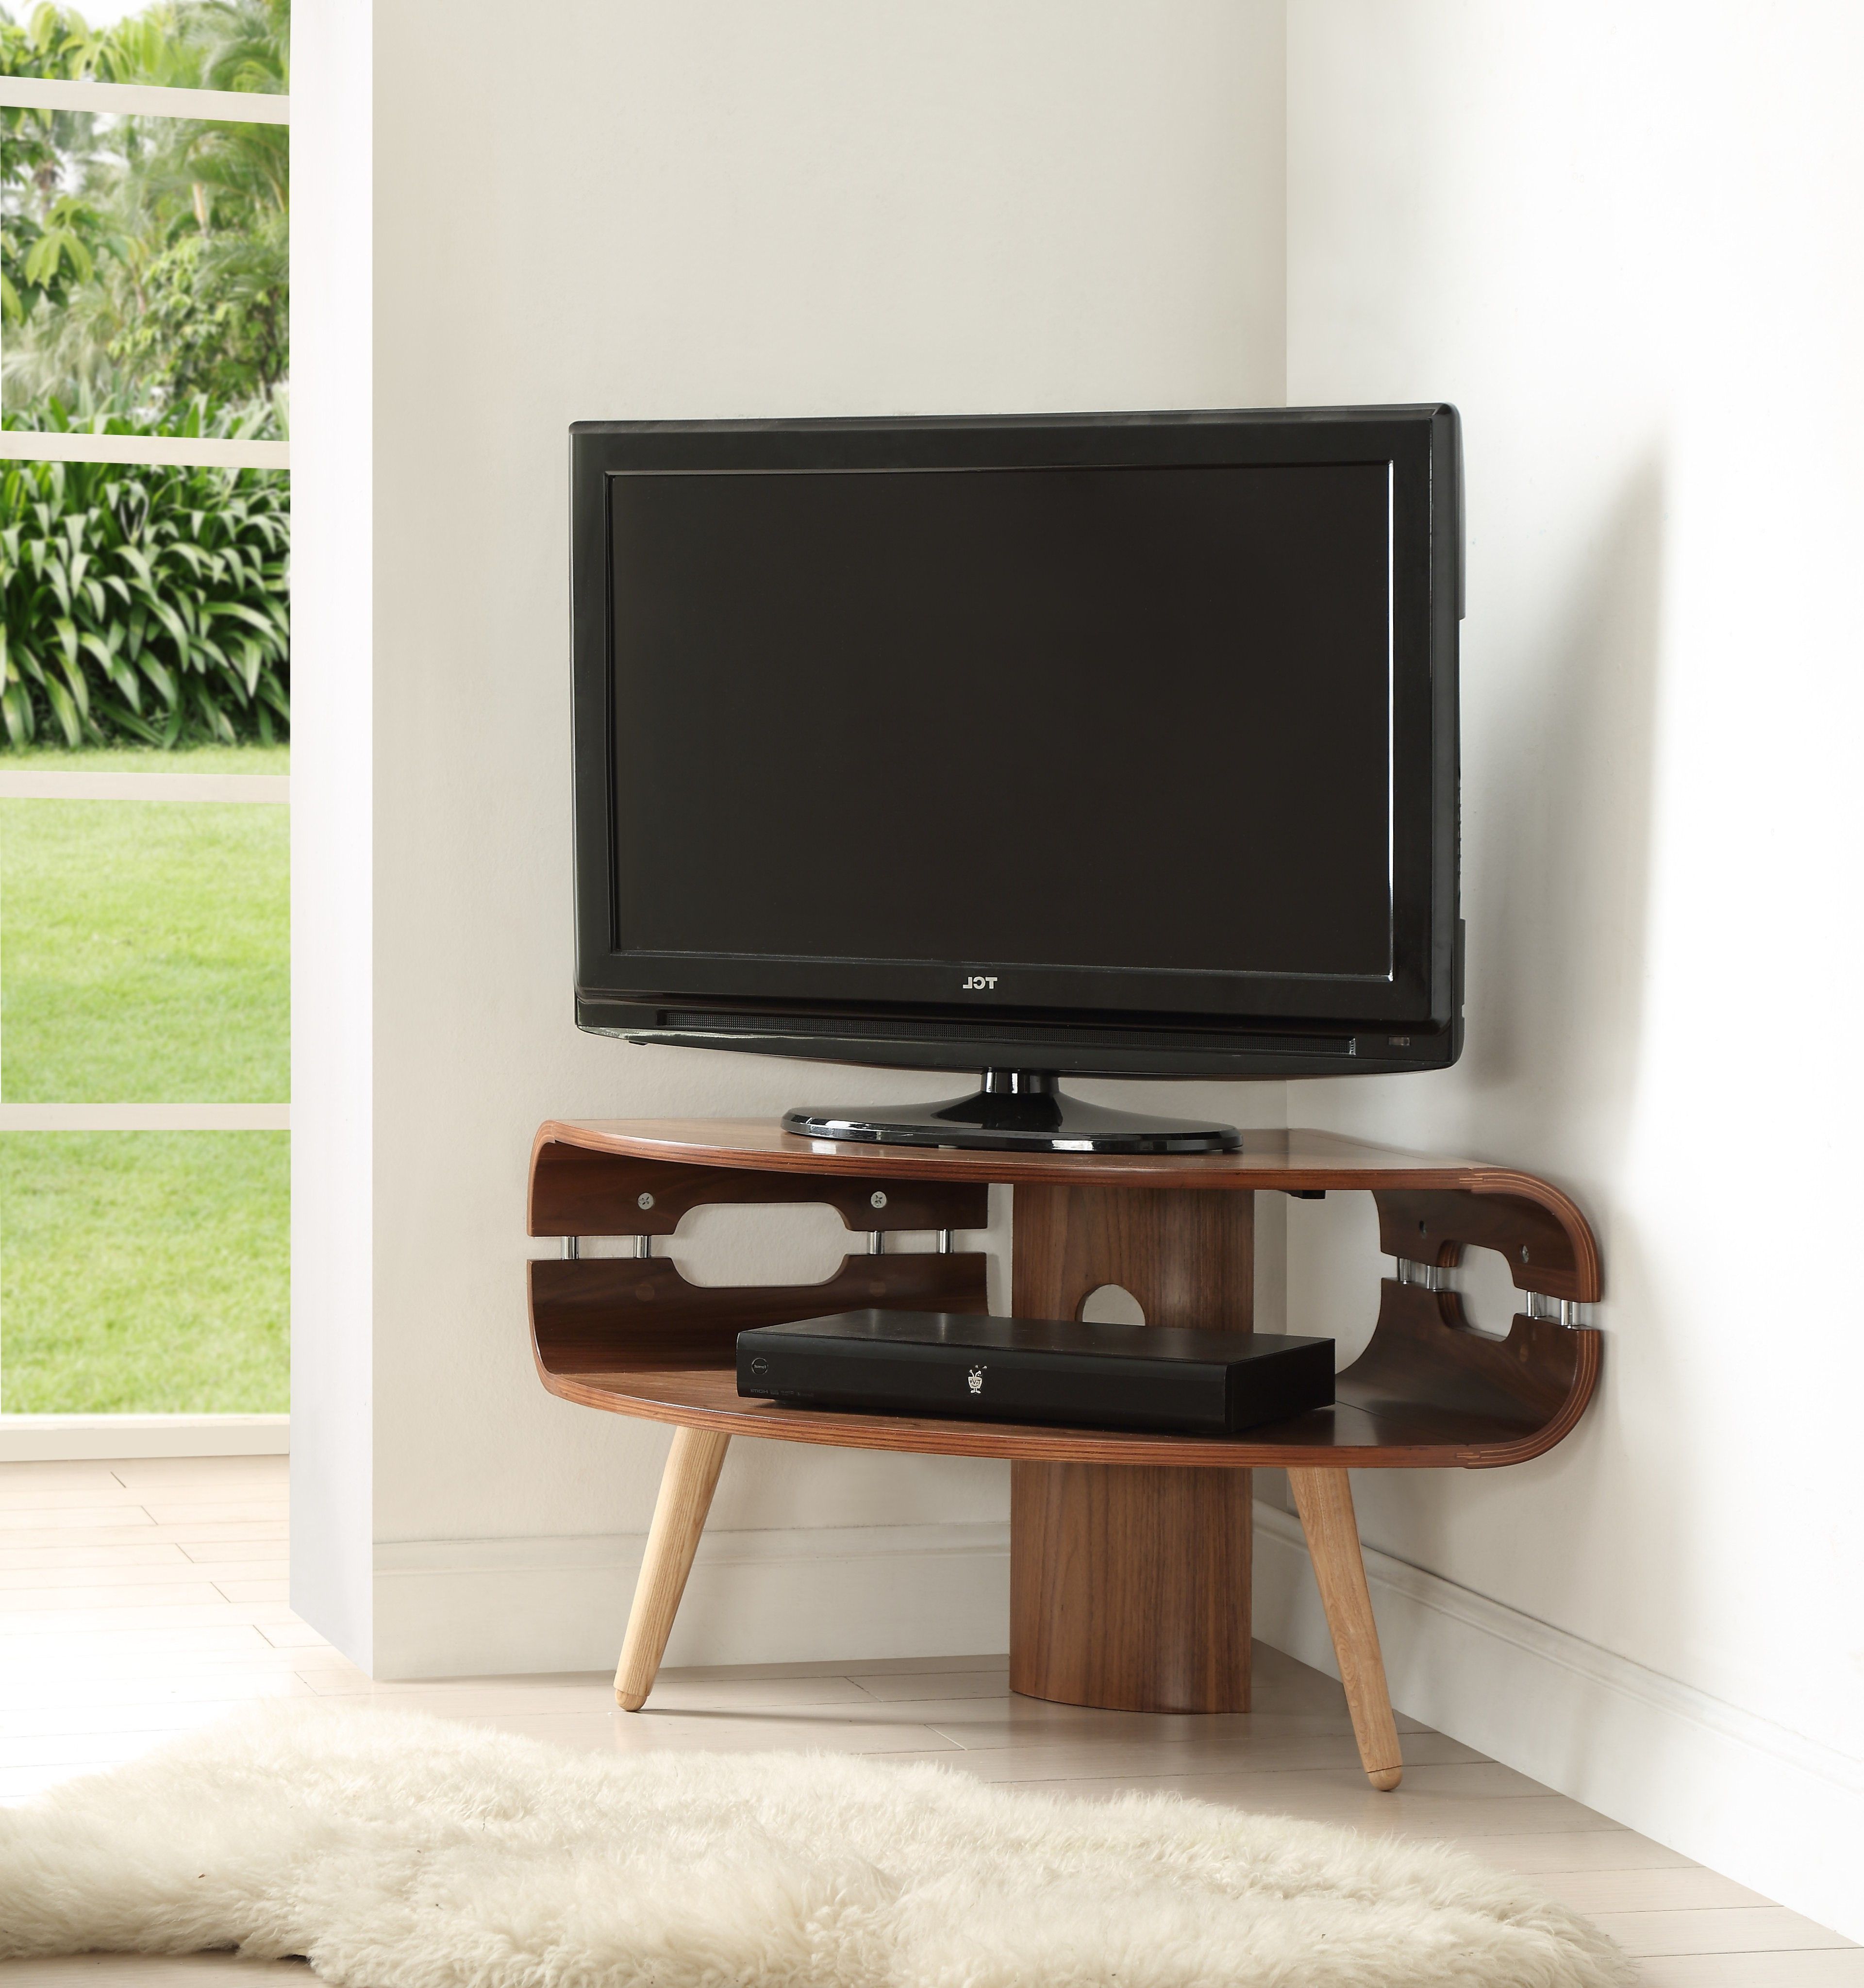 Corner Tv Stands Intended For Most Current Jf701 Corner Tv Stand – Cooks (View 6 of 20)